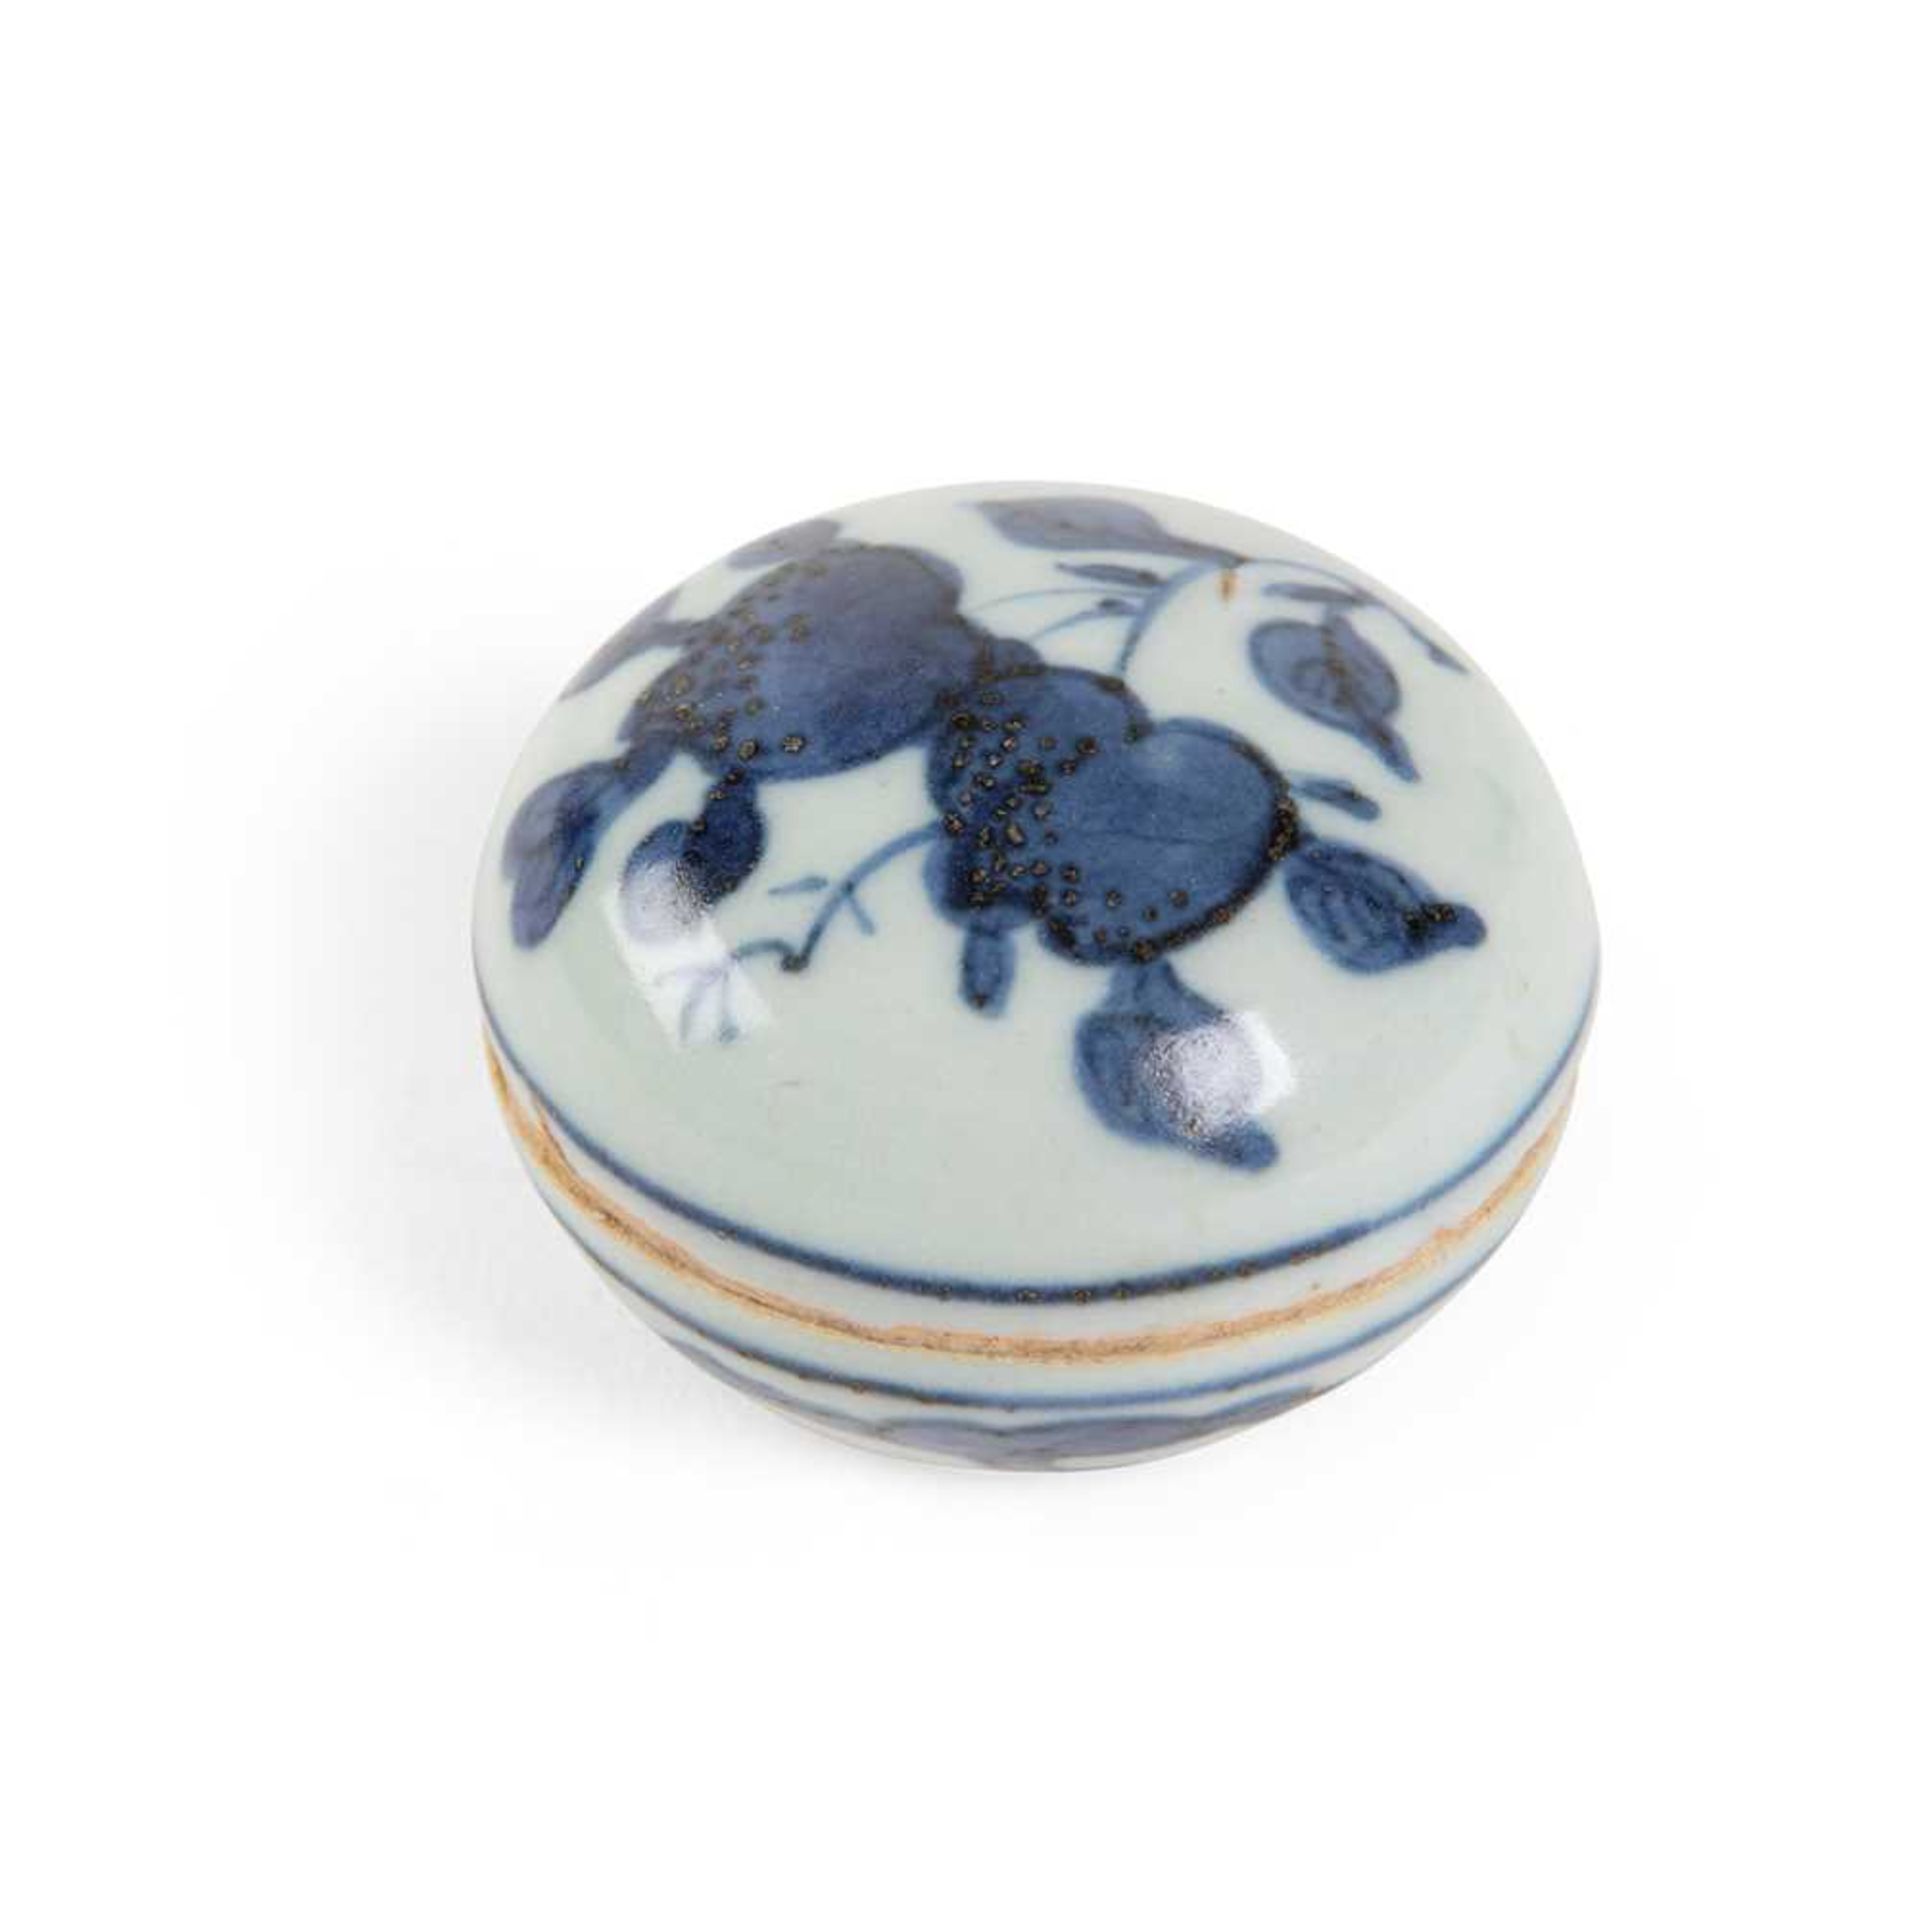 BLUE AND WHITE BOX WITH COVER LATE MING TO QING DYNASTY, 17TH CENTURY